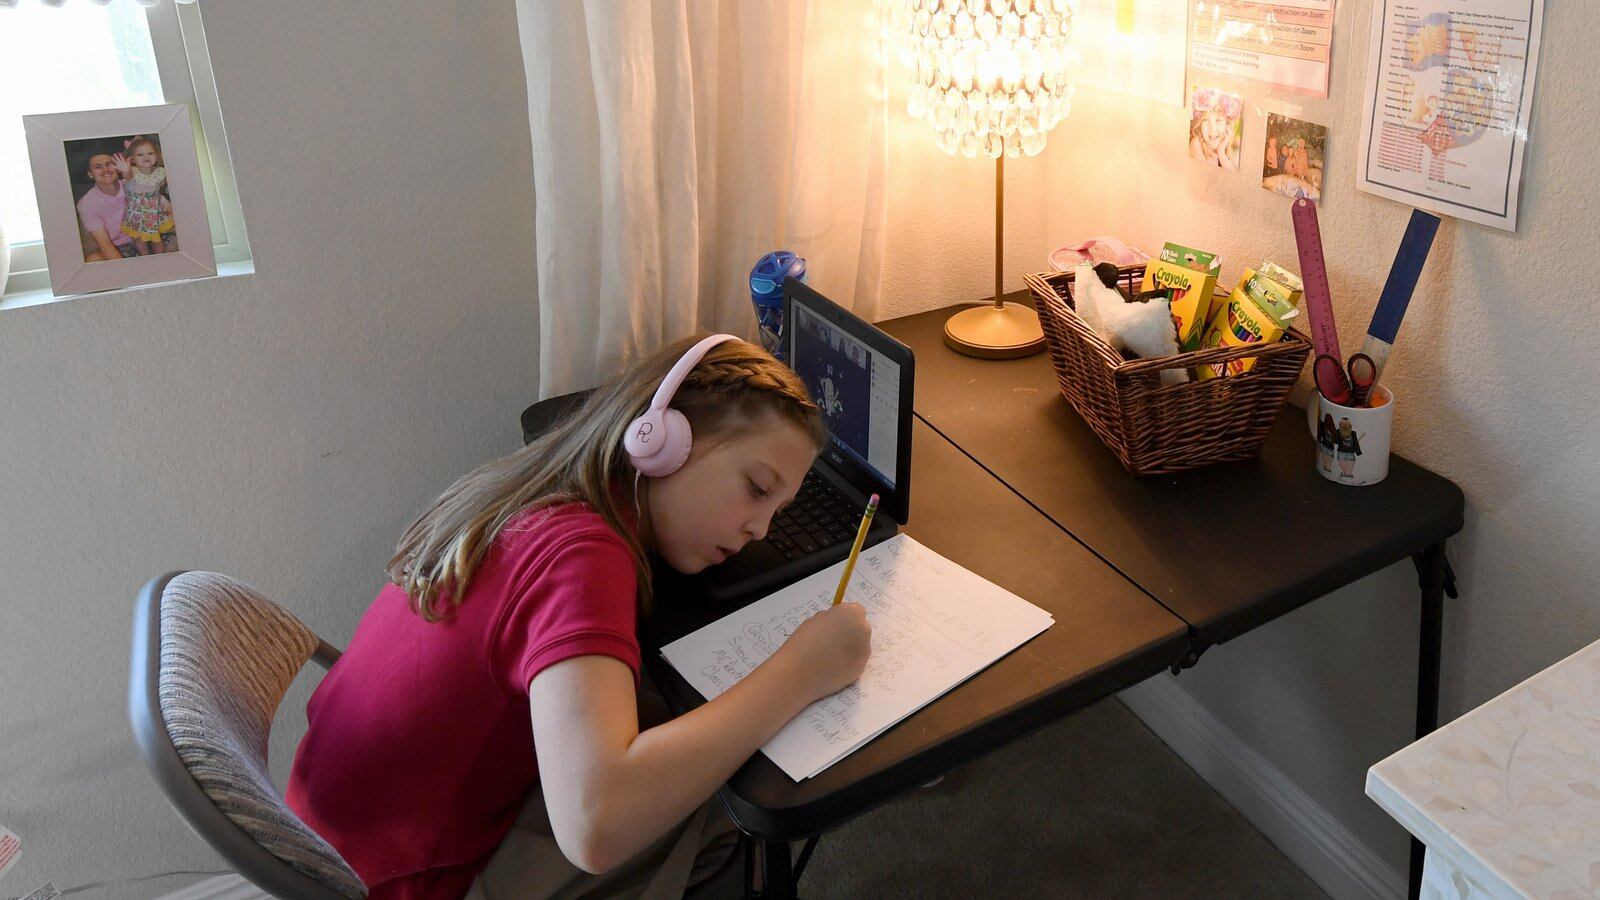 A young girl wearing a pink shirt and headphones writes on a piece of paper while sitting at her desk with a laptop open in front of her.